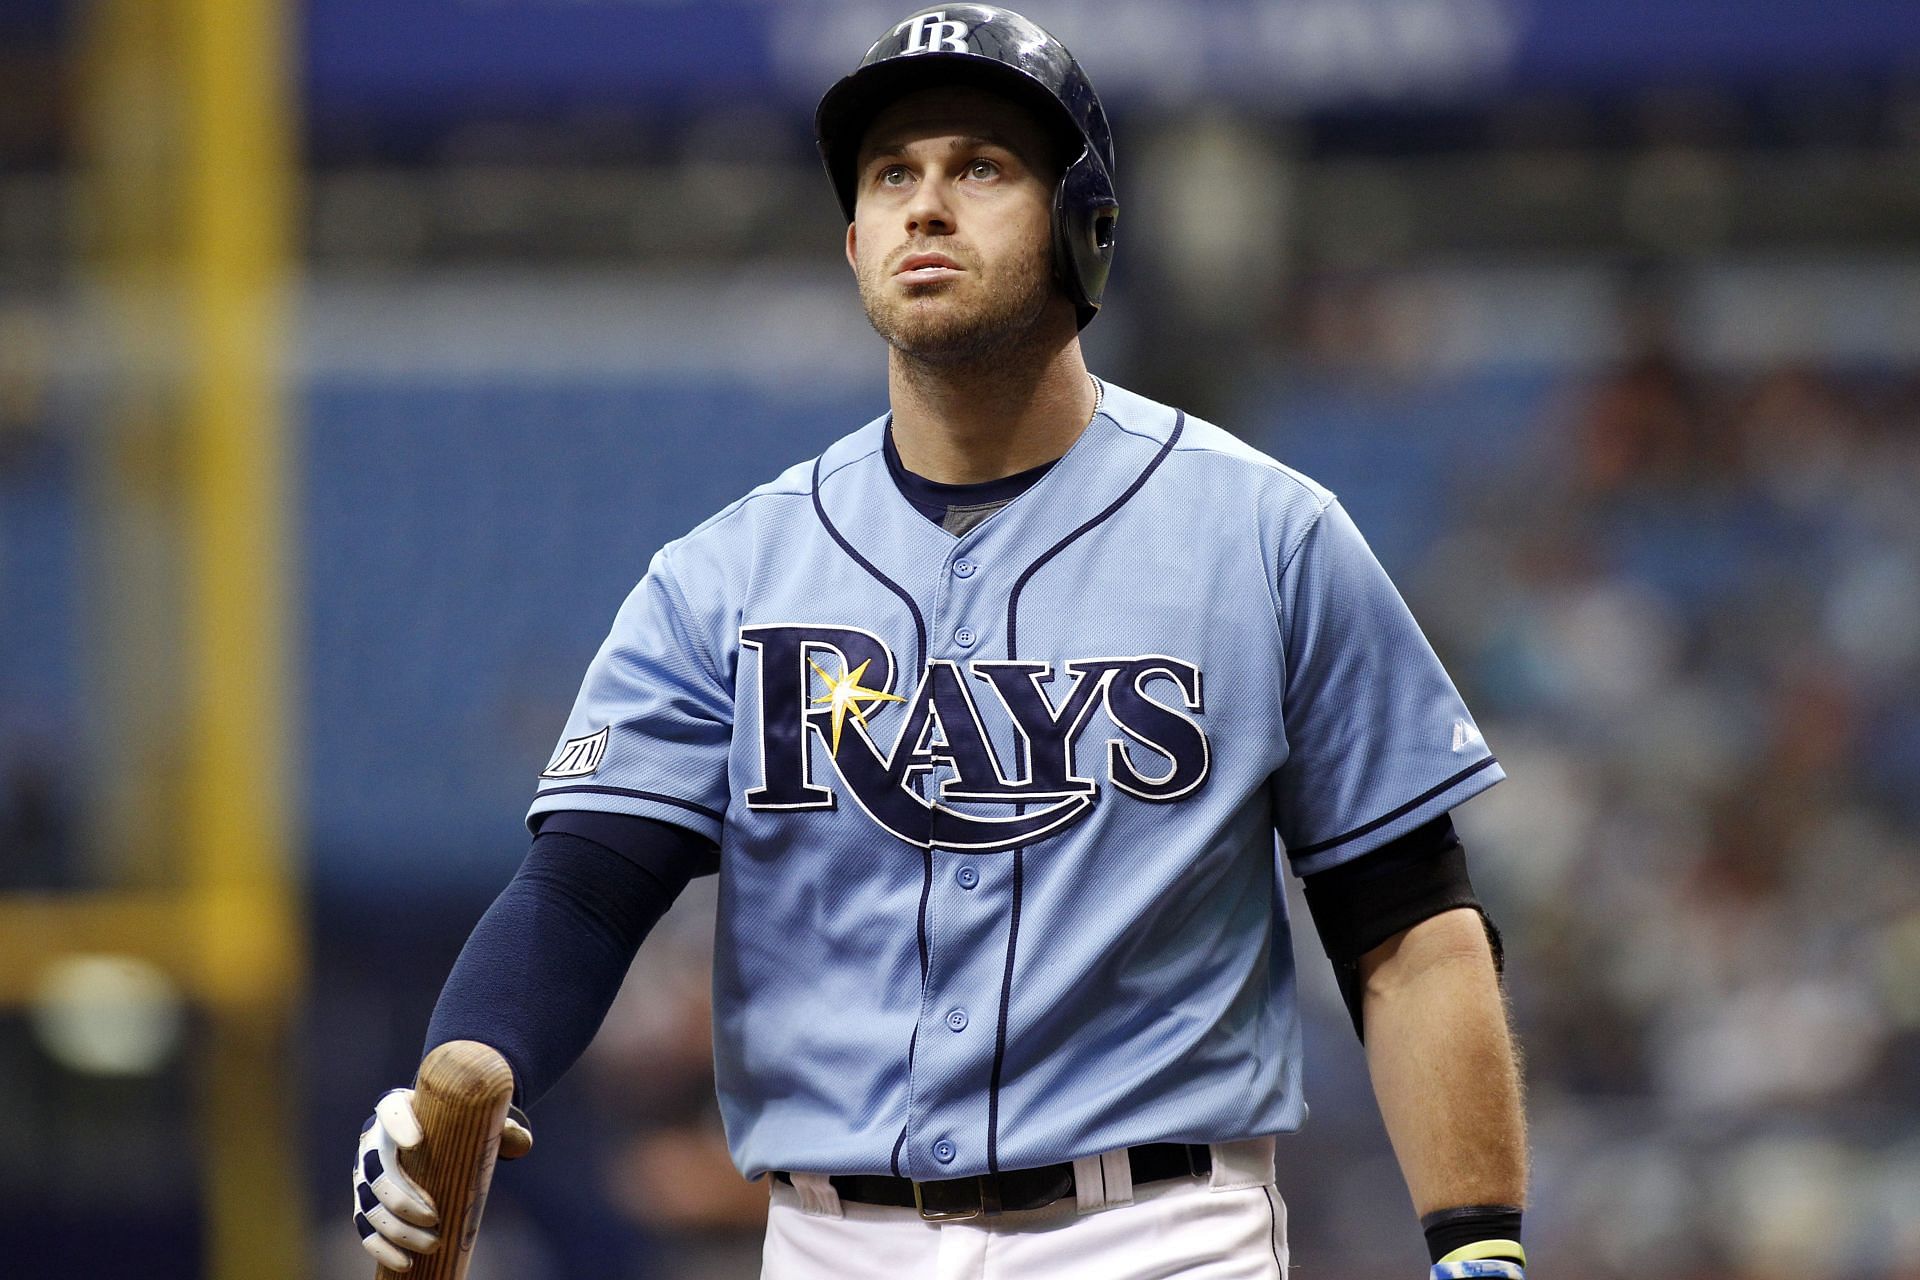 Muted reaction to Tampa Bay Rays star Evan Longoria's stolen AK-47 seems  off-kilter 